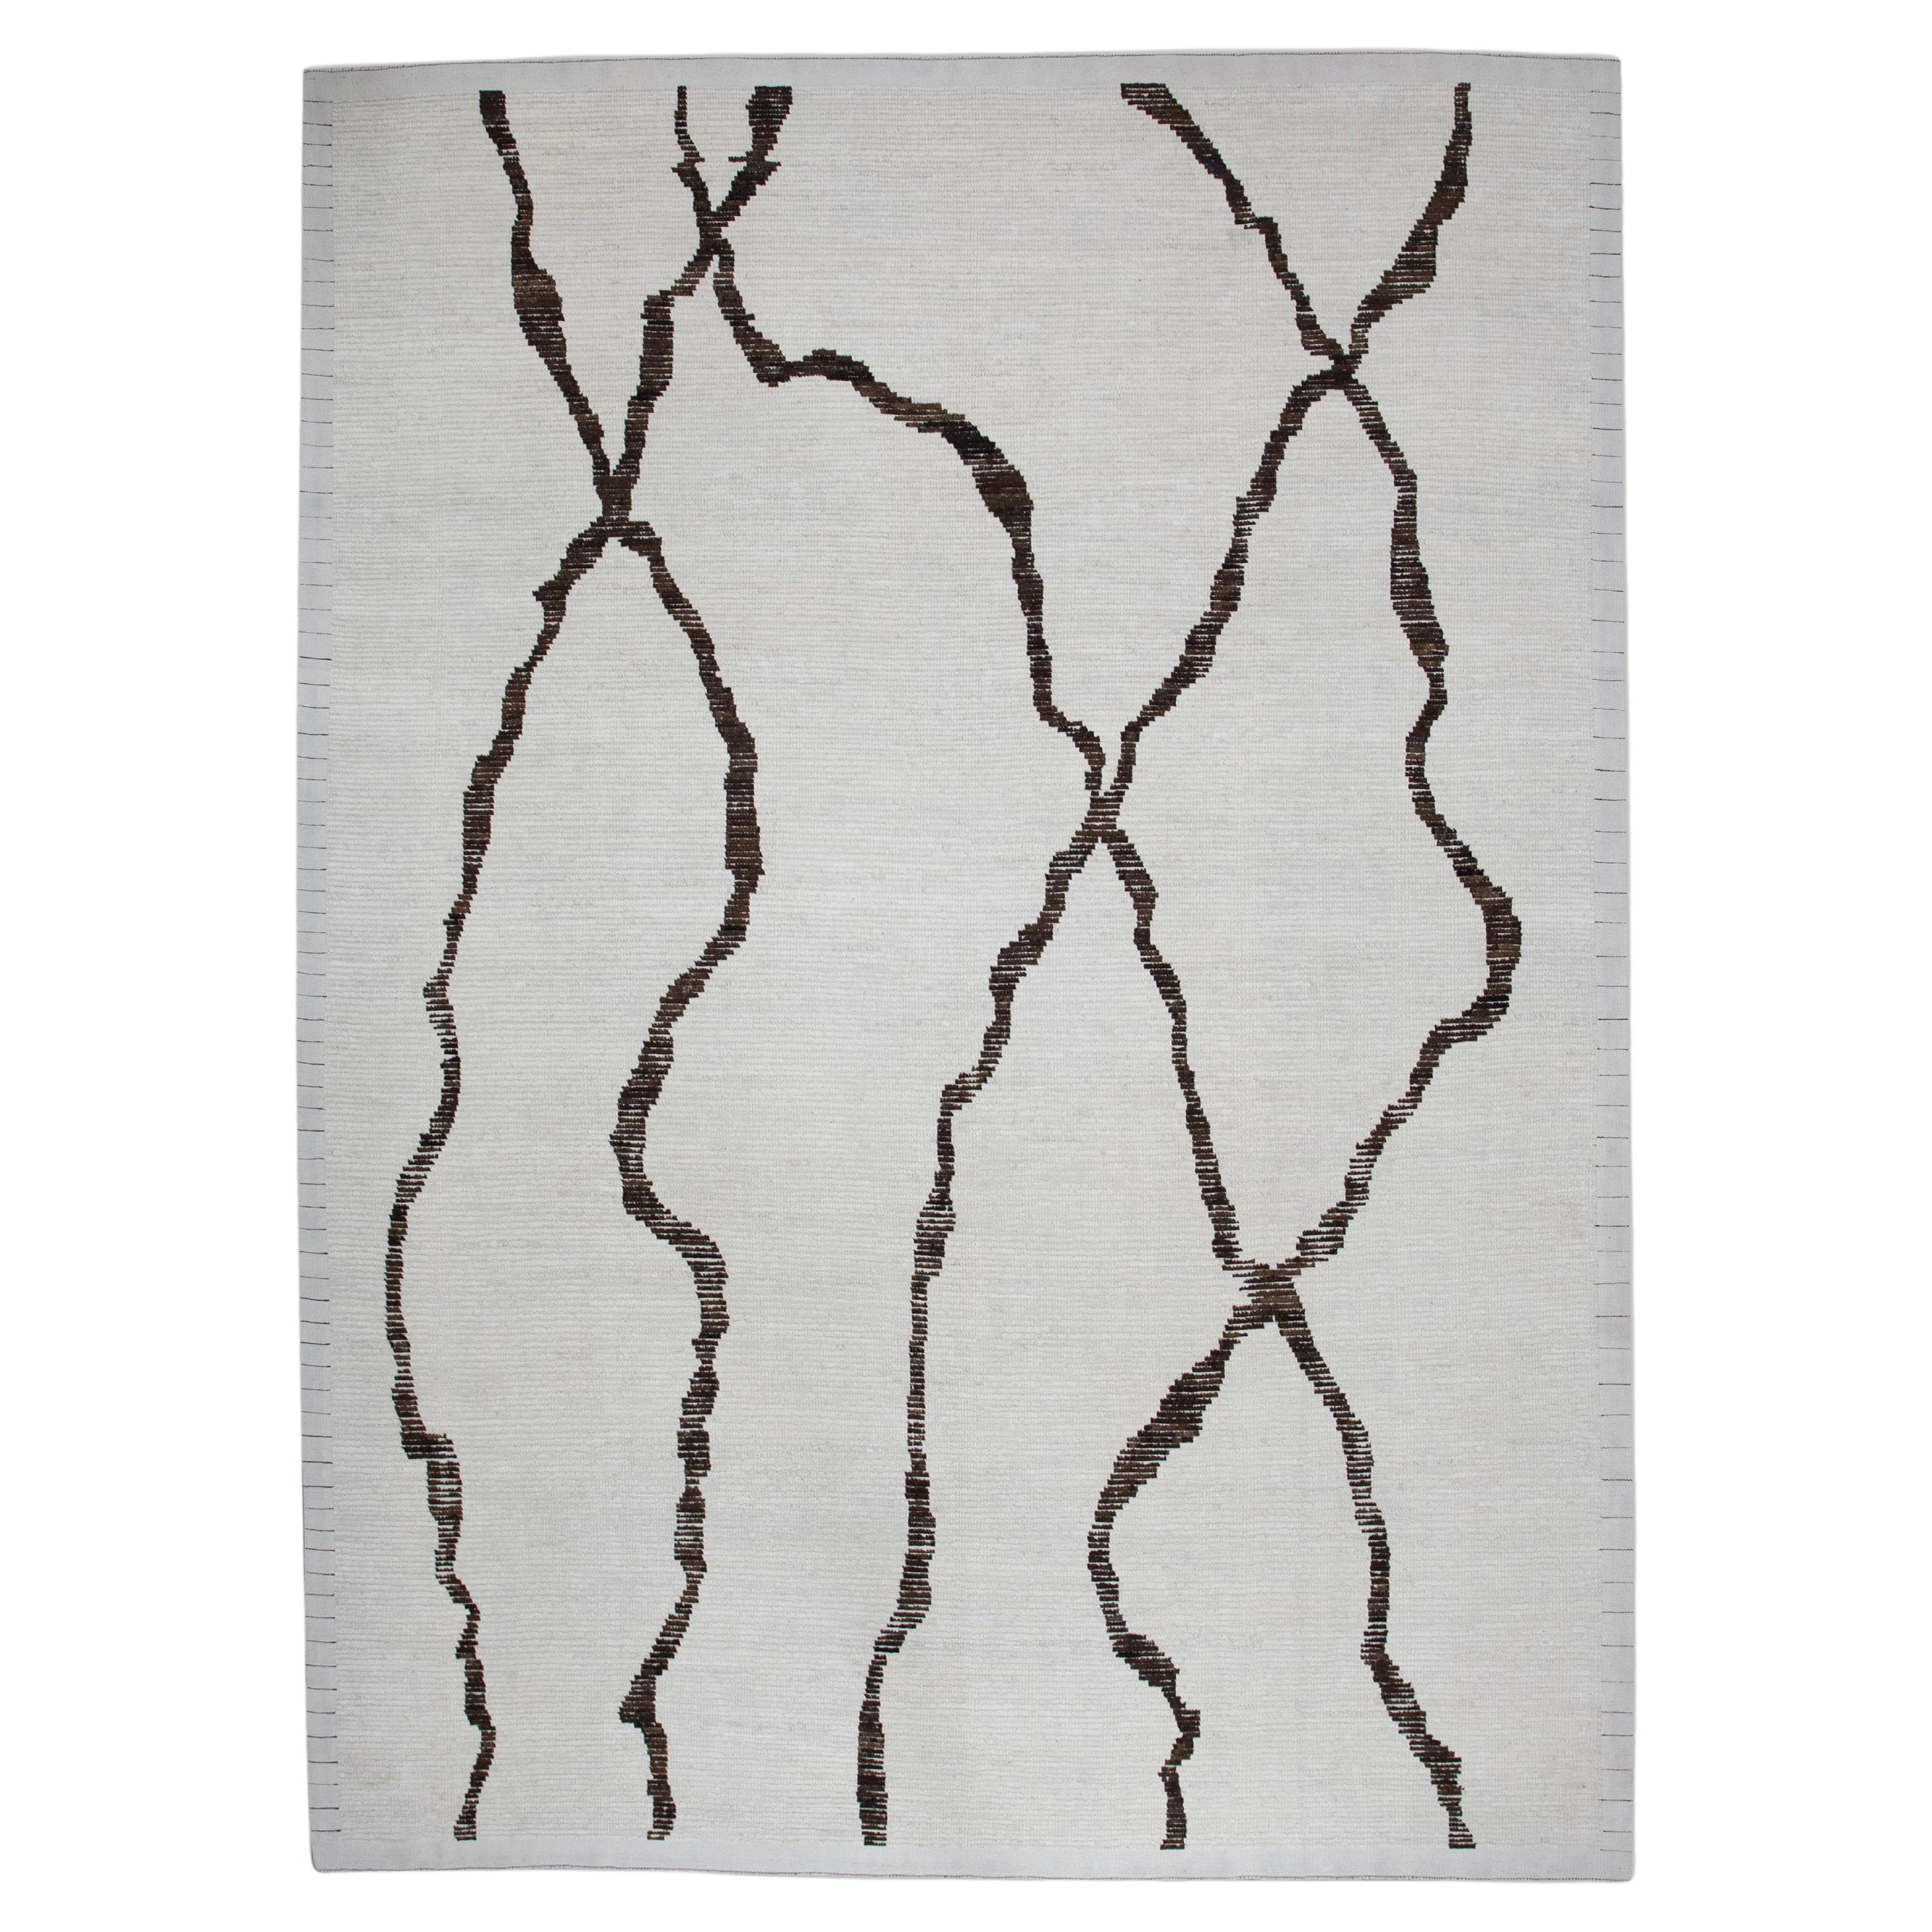 21st Century Modern Moroccan Style Wool Rug in Brown & Beige 8'10" X 12'10" For Sale